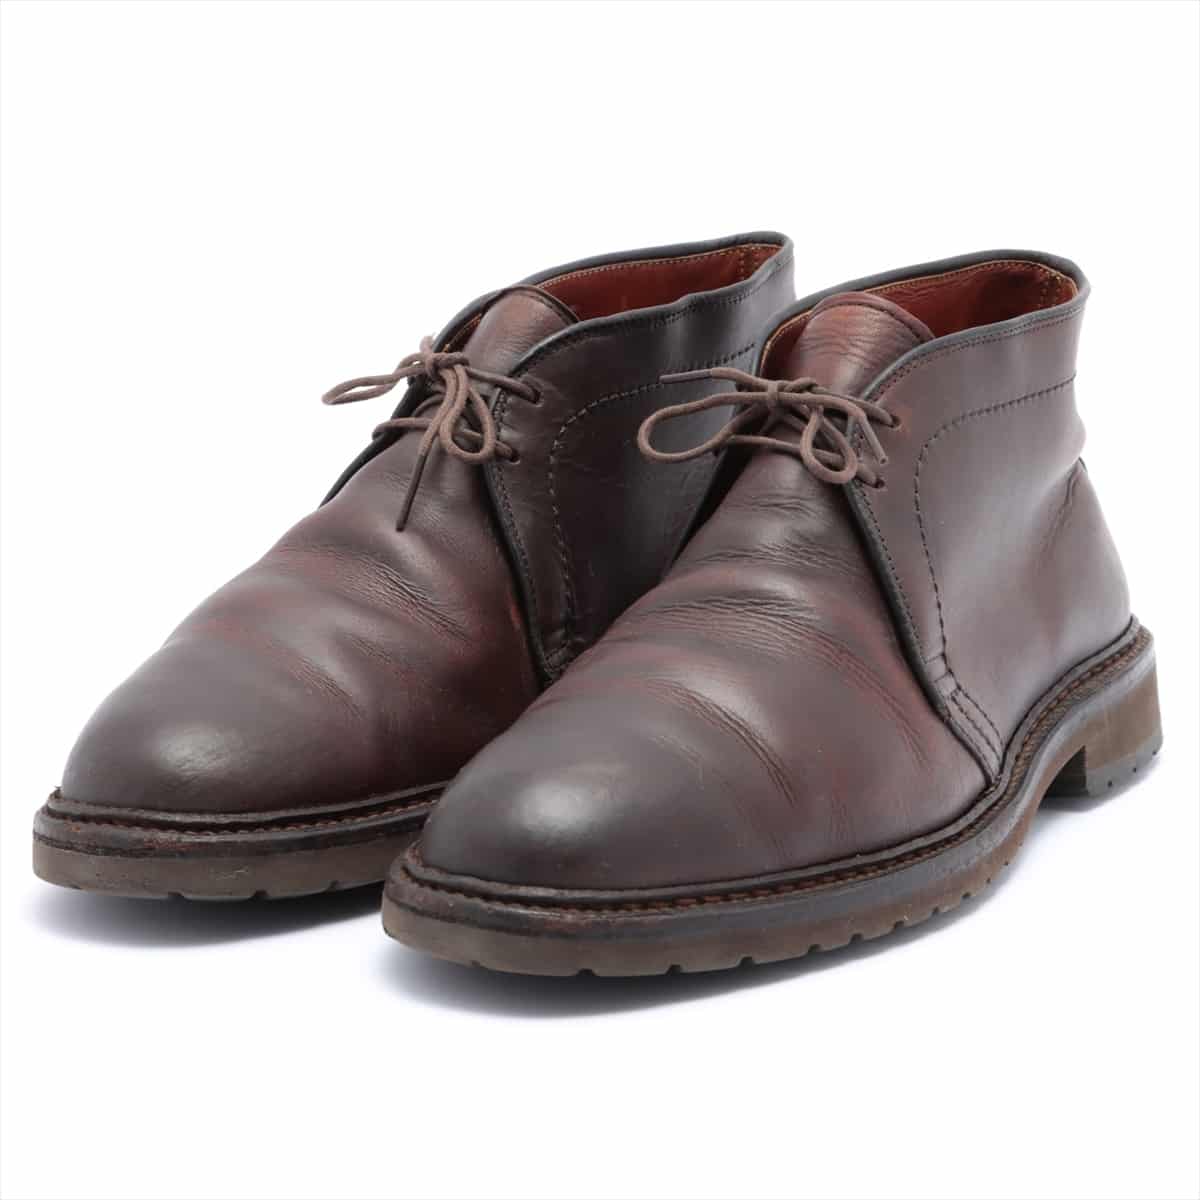 Alden Leather Chukka Boots 9 Men's Brown There is stickiness